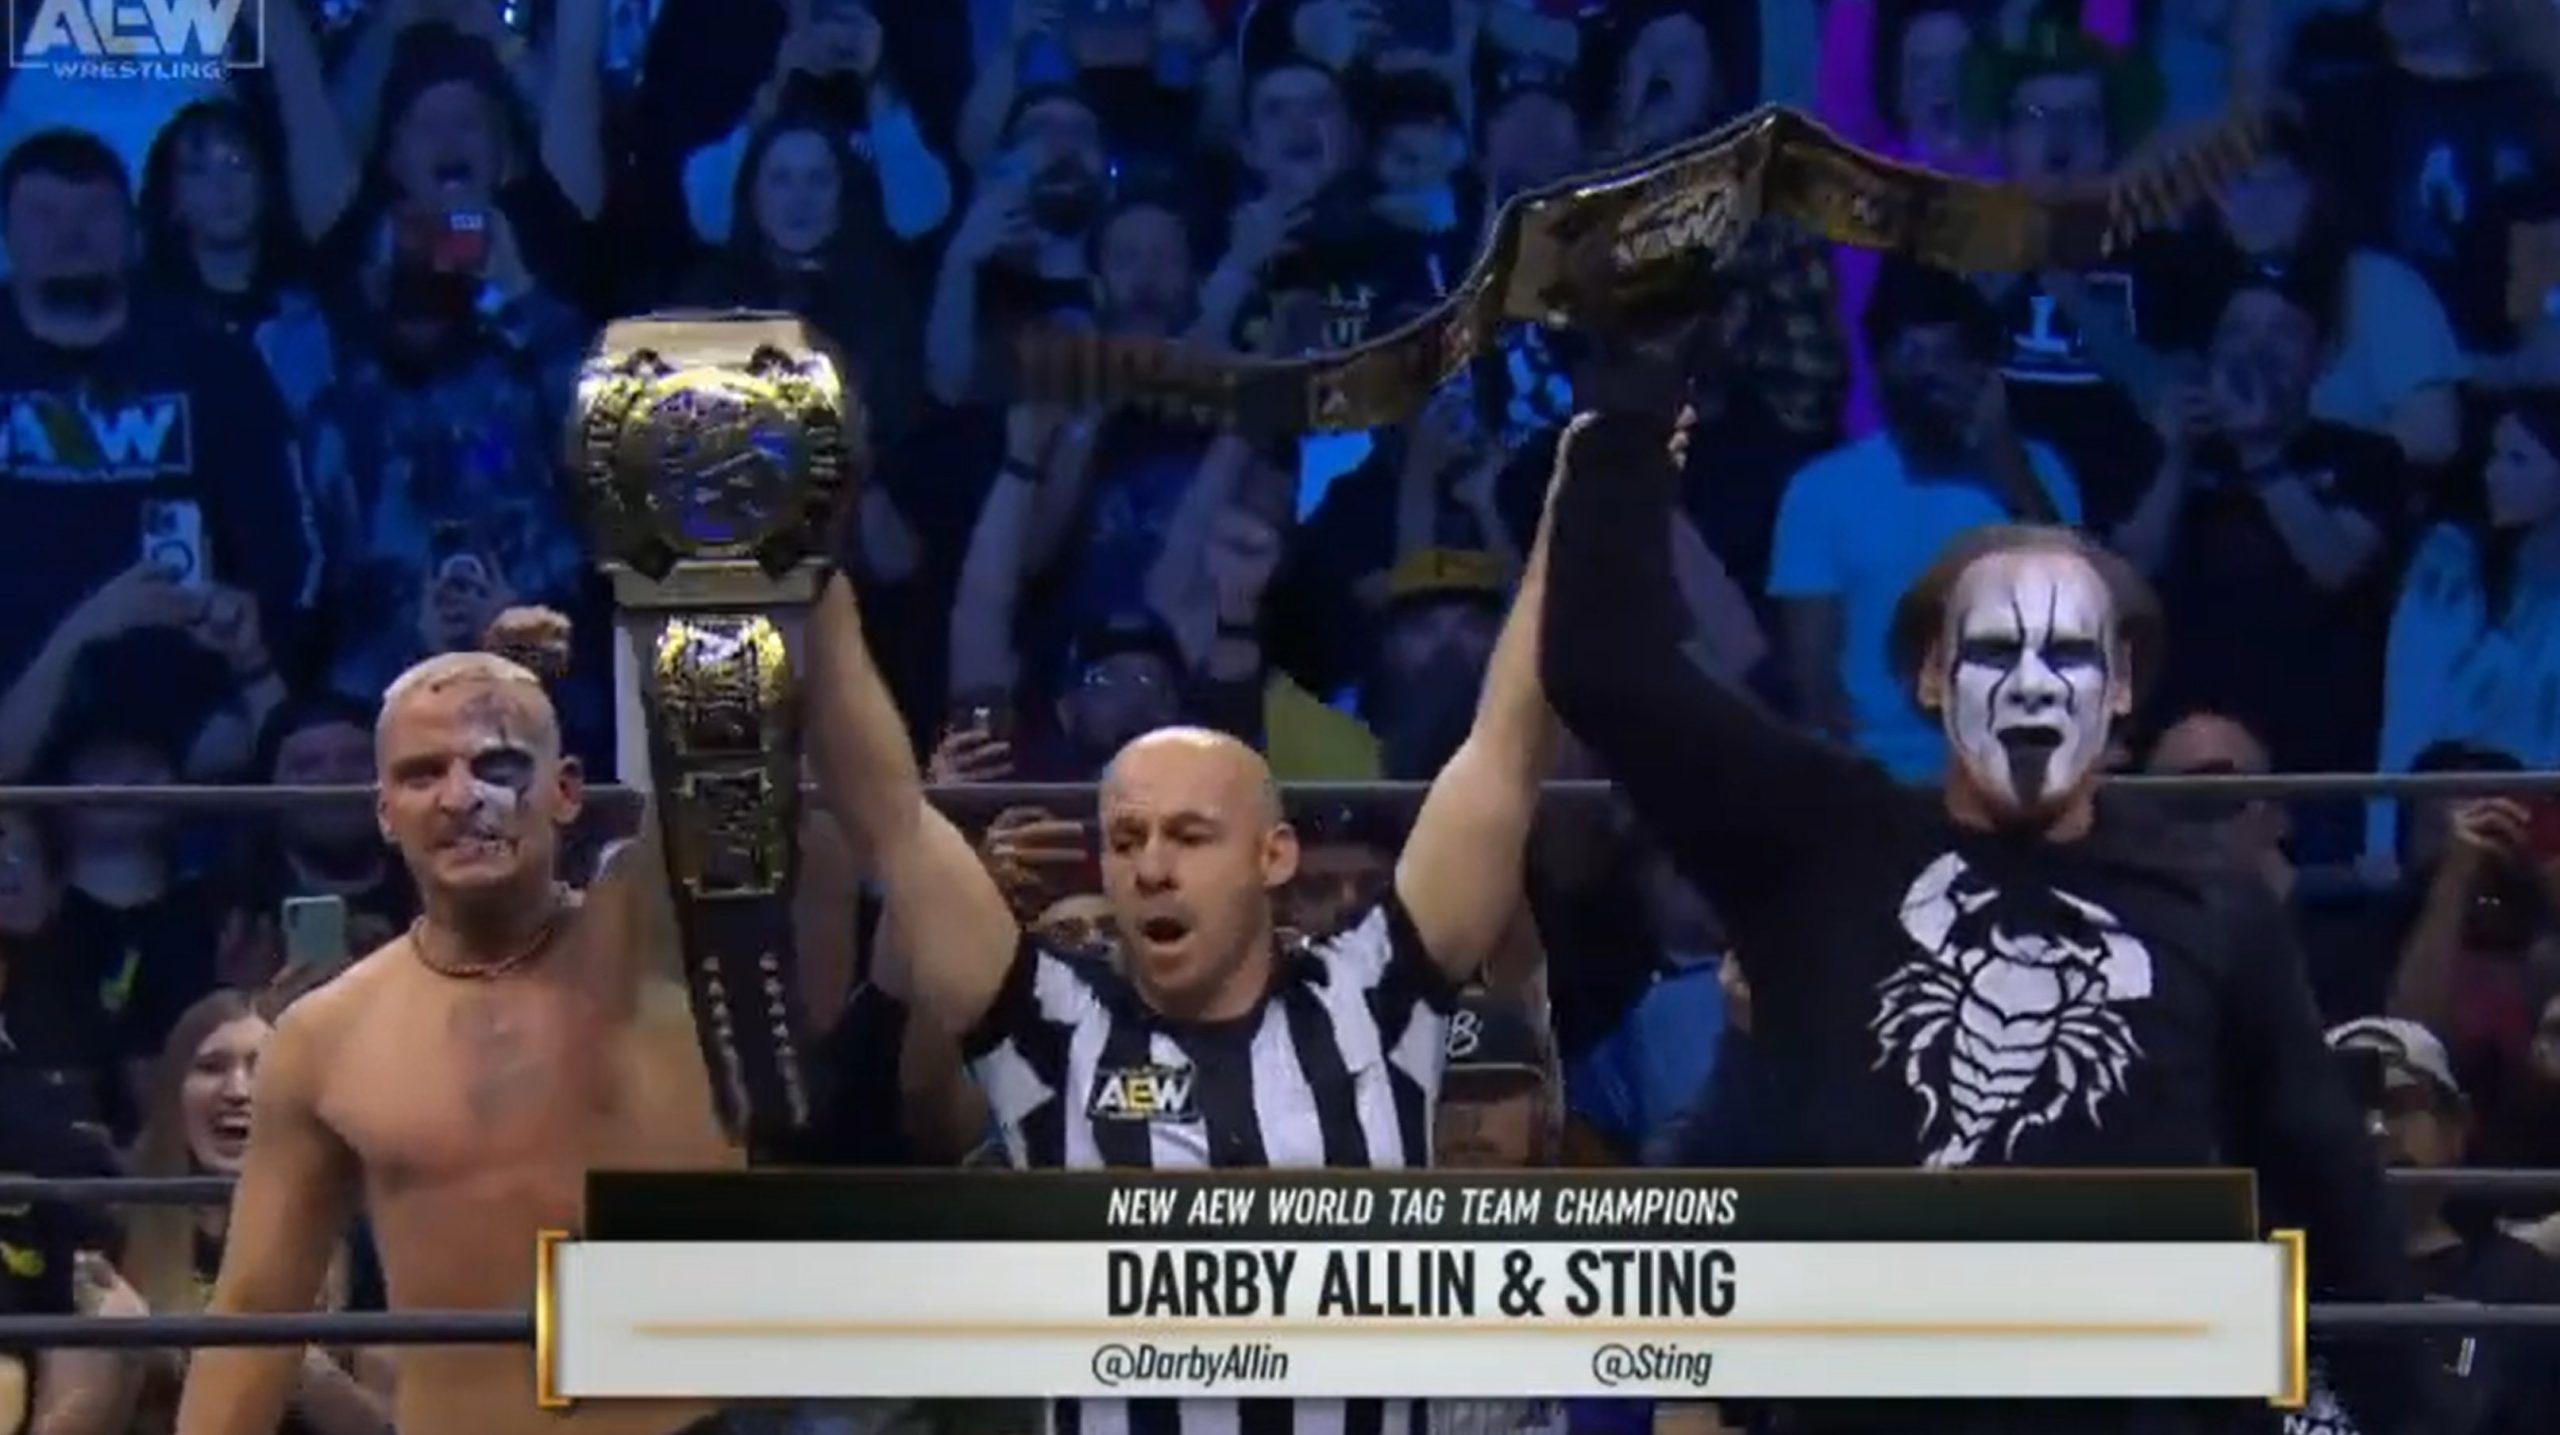 A photo from AEW Dynamite featuring AEW World Tag Team Champions Sting and Darby Allin.